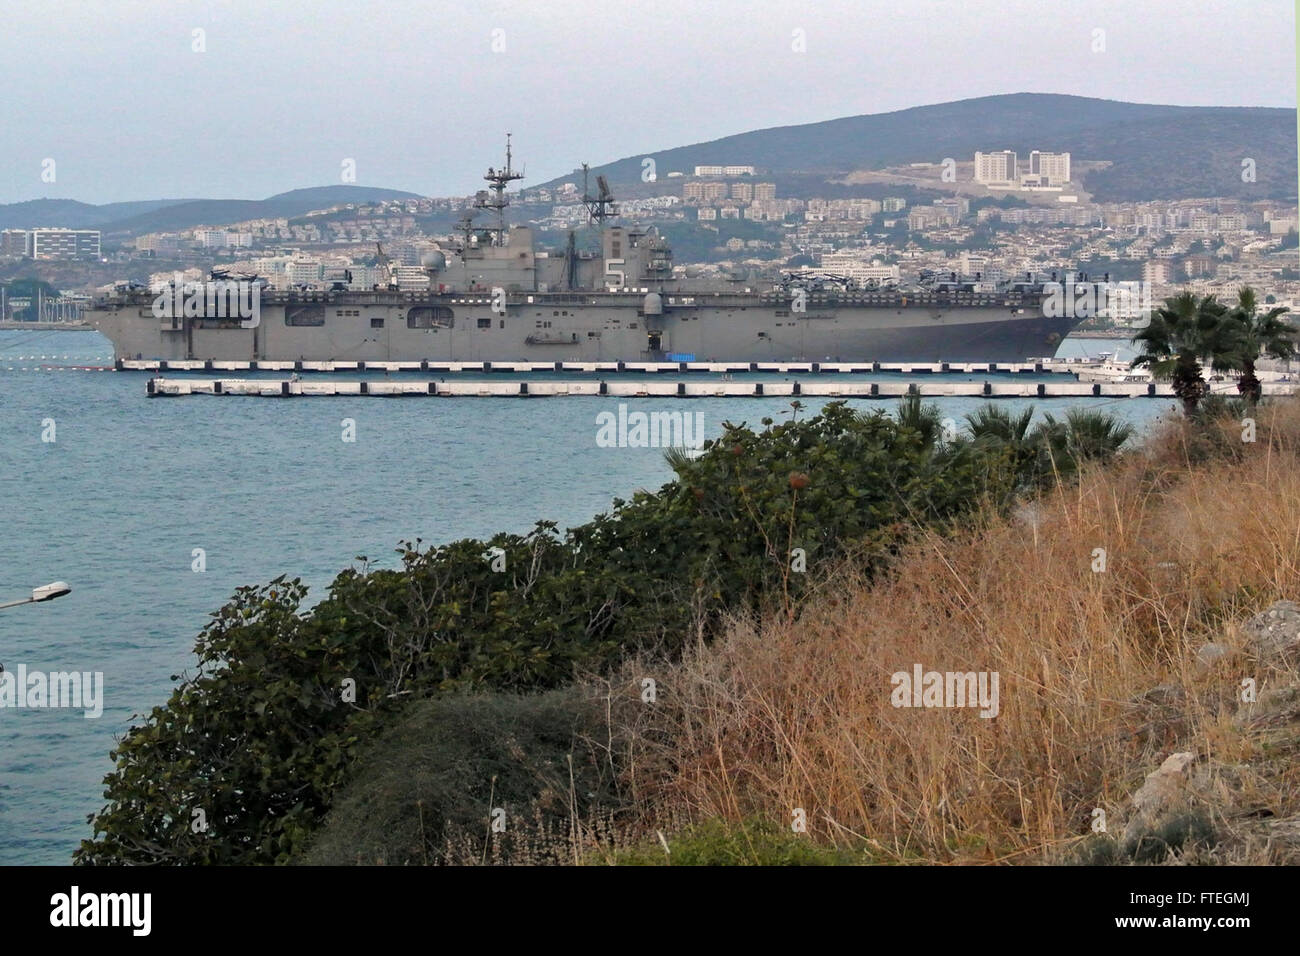 KUSADASI, Turkey (Oct. 4, 2014) The amphibious assault ship USS Bataan (LHD 5) sits pier side for a port call in Kusadasi, Turkey. The Bataan Amphibious Ready Group is on a scheduled deployment supporting maritime security operations, providing crisis response capability and theater security cooperation efforts in the U.S. 6th Fleet area of operations. Stock Photo